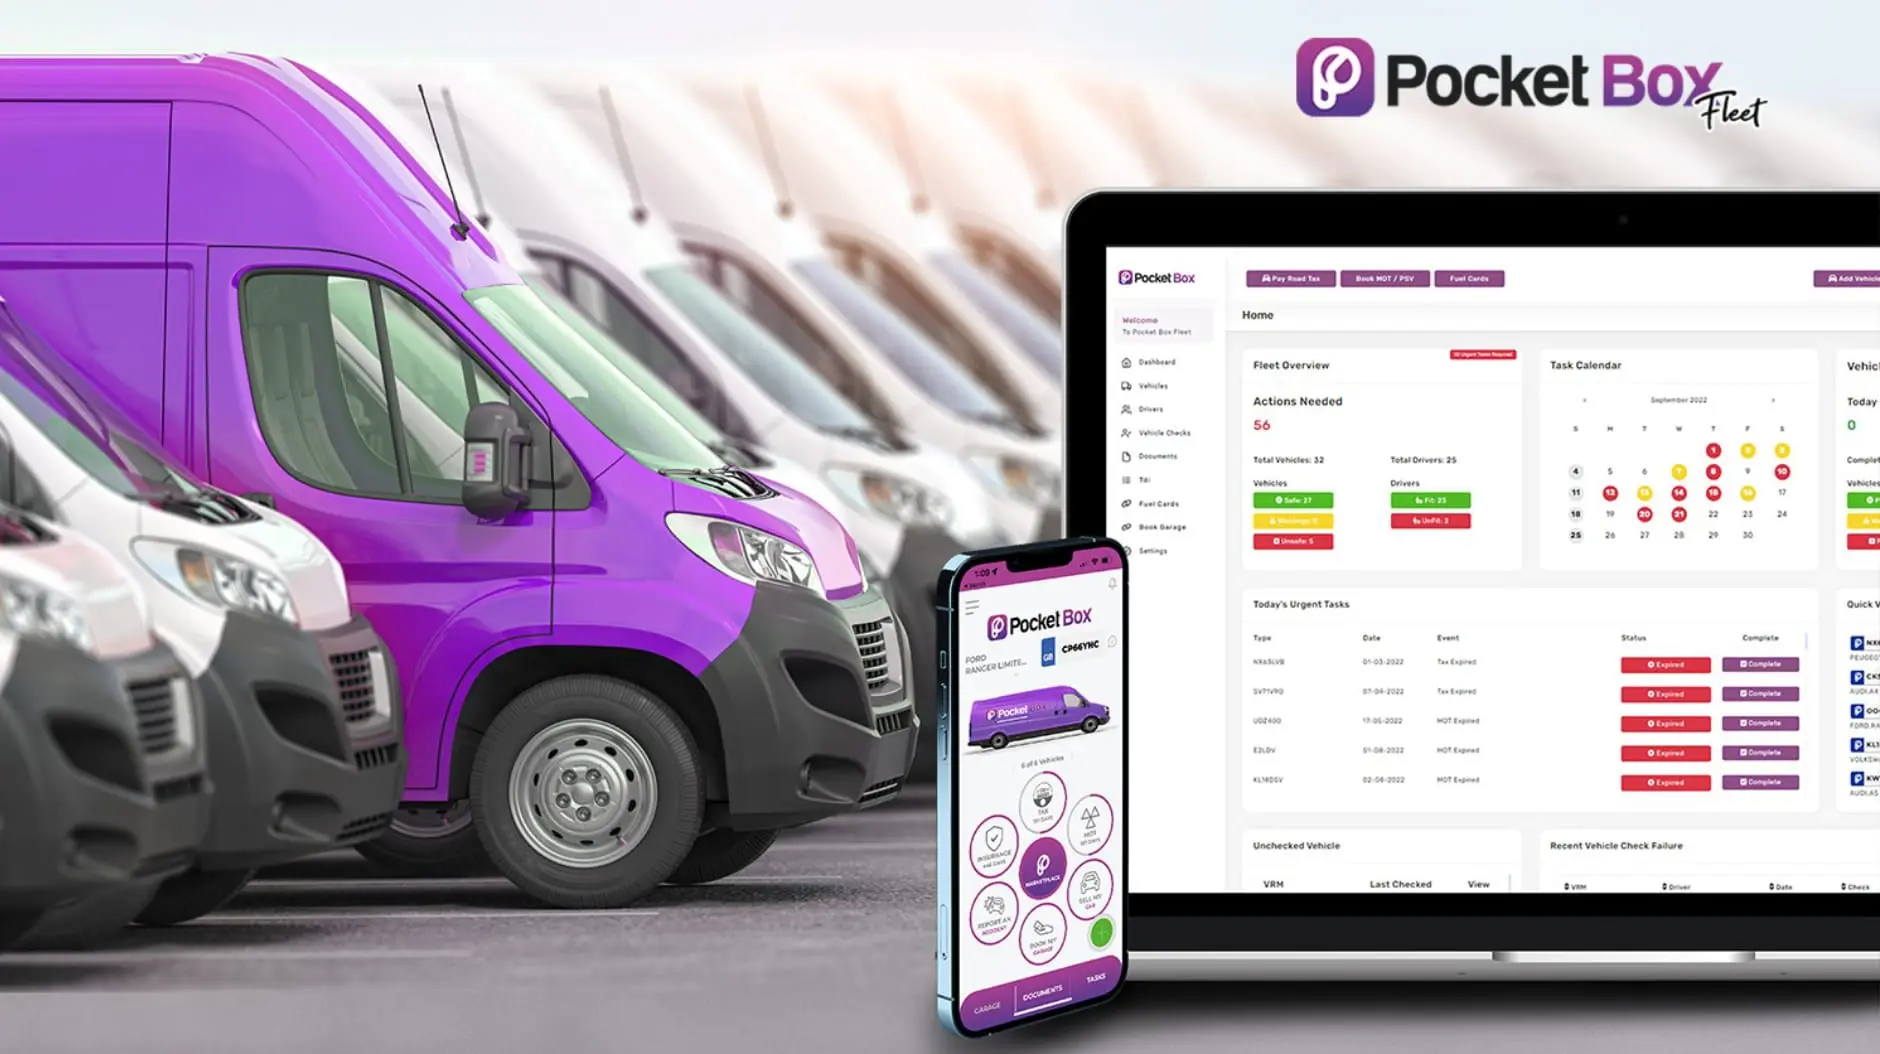 Picture of a purple van in-between many other vans that is being managed by integrated fleet technology.